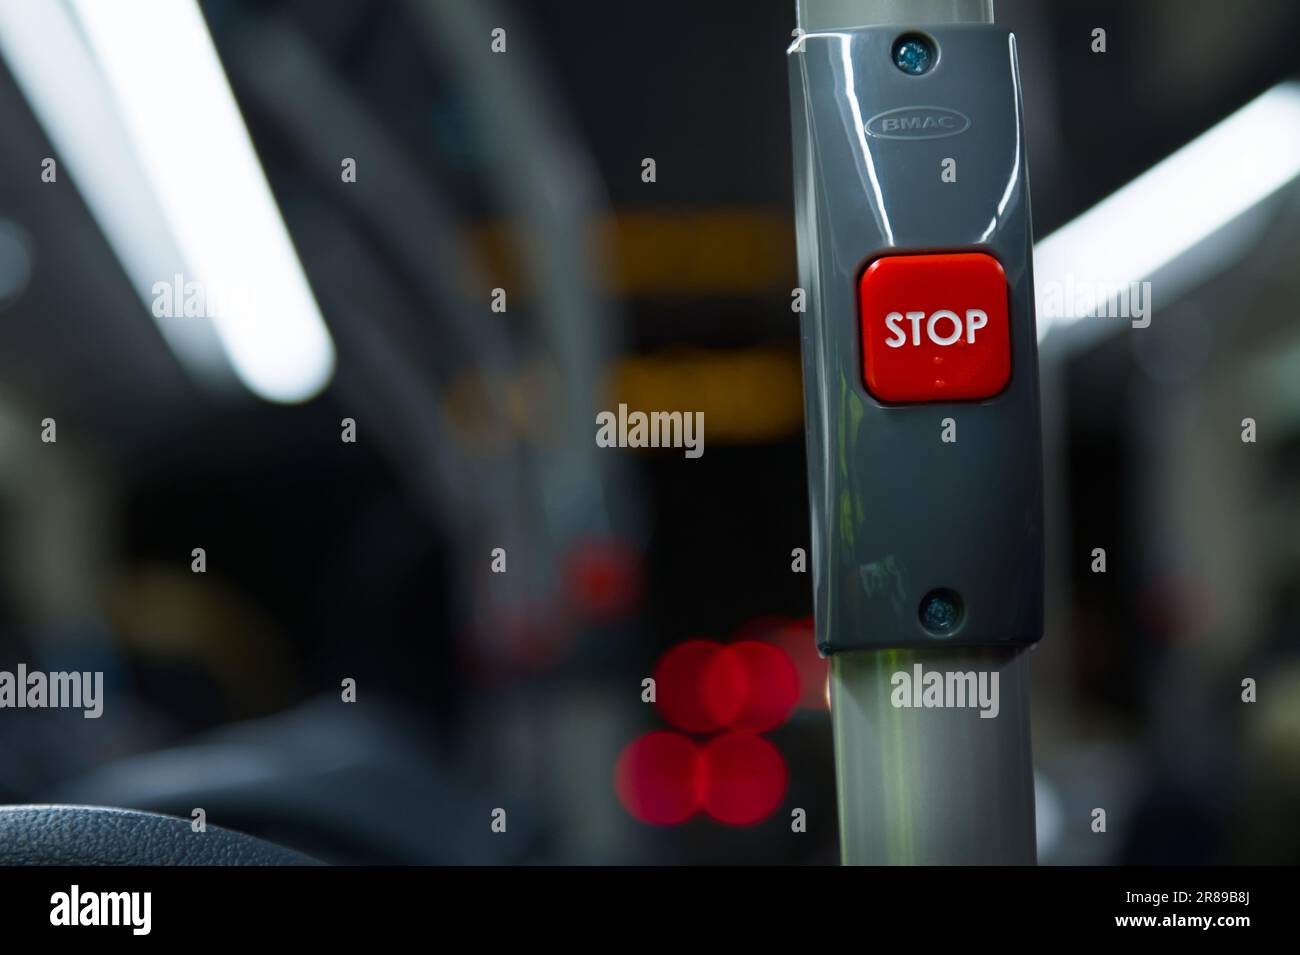 Red Stop Request Button On A Bus At Night, England UK Stock Photo